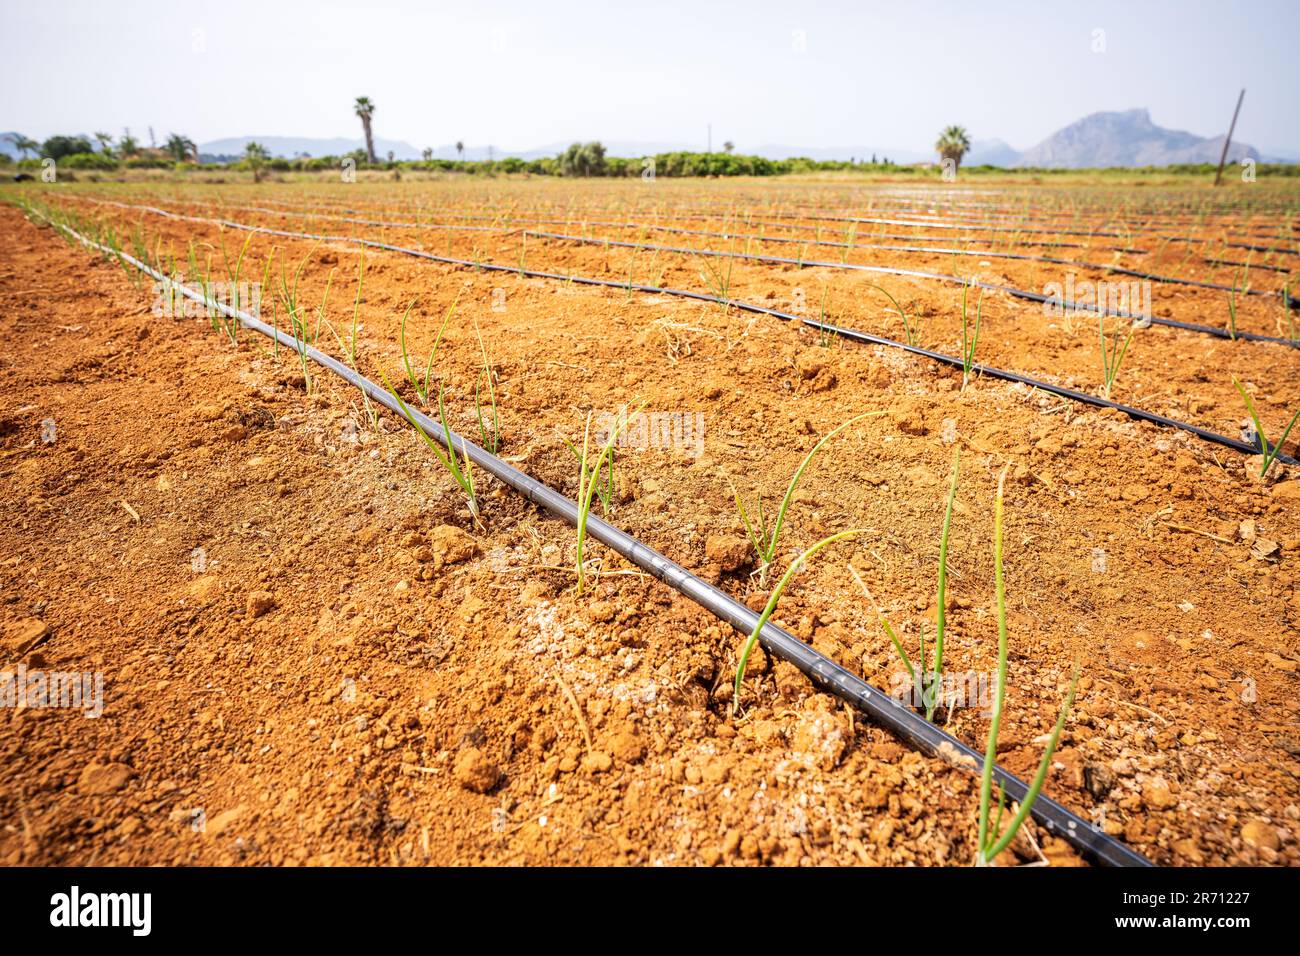 Irrigation system with small emerging plants on very dry soil Stock Photo